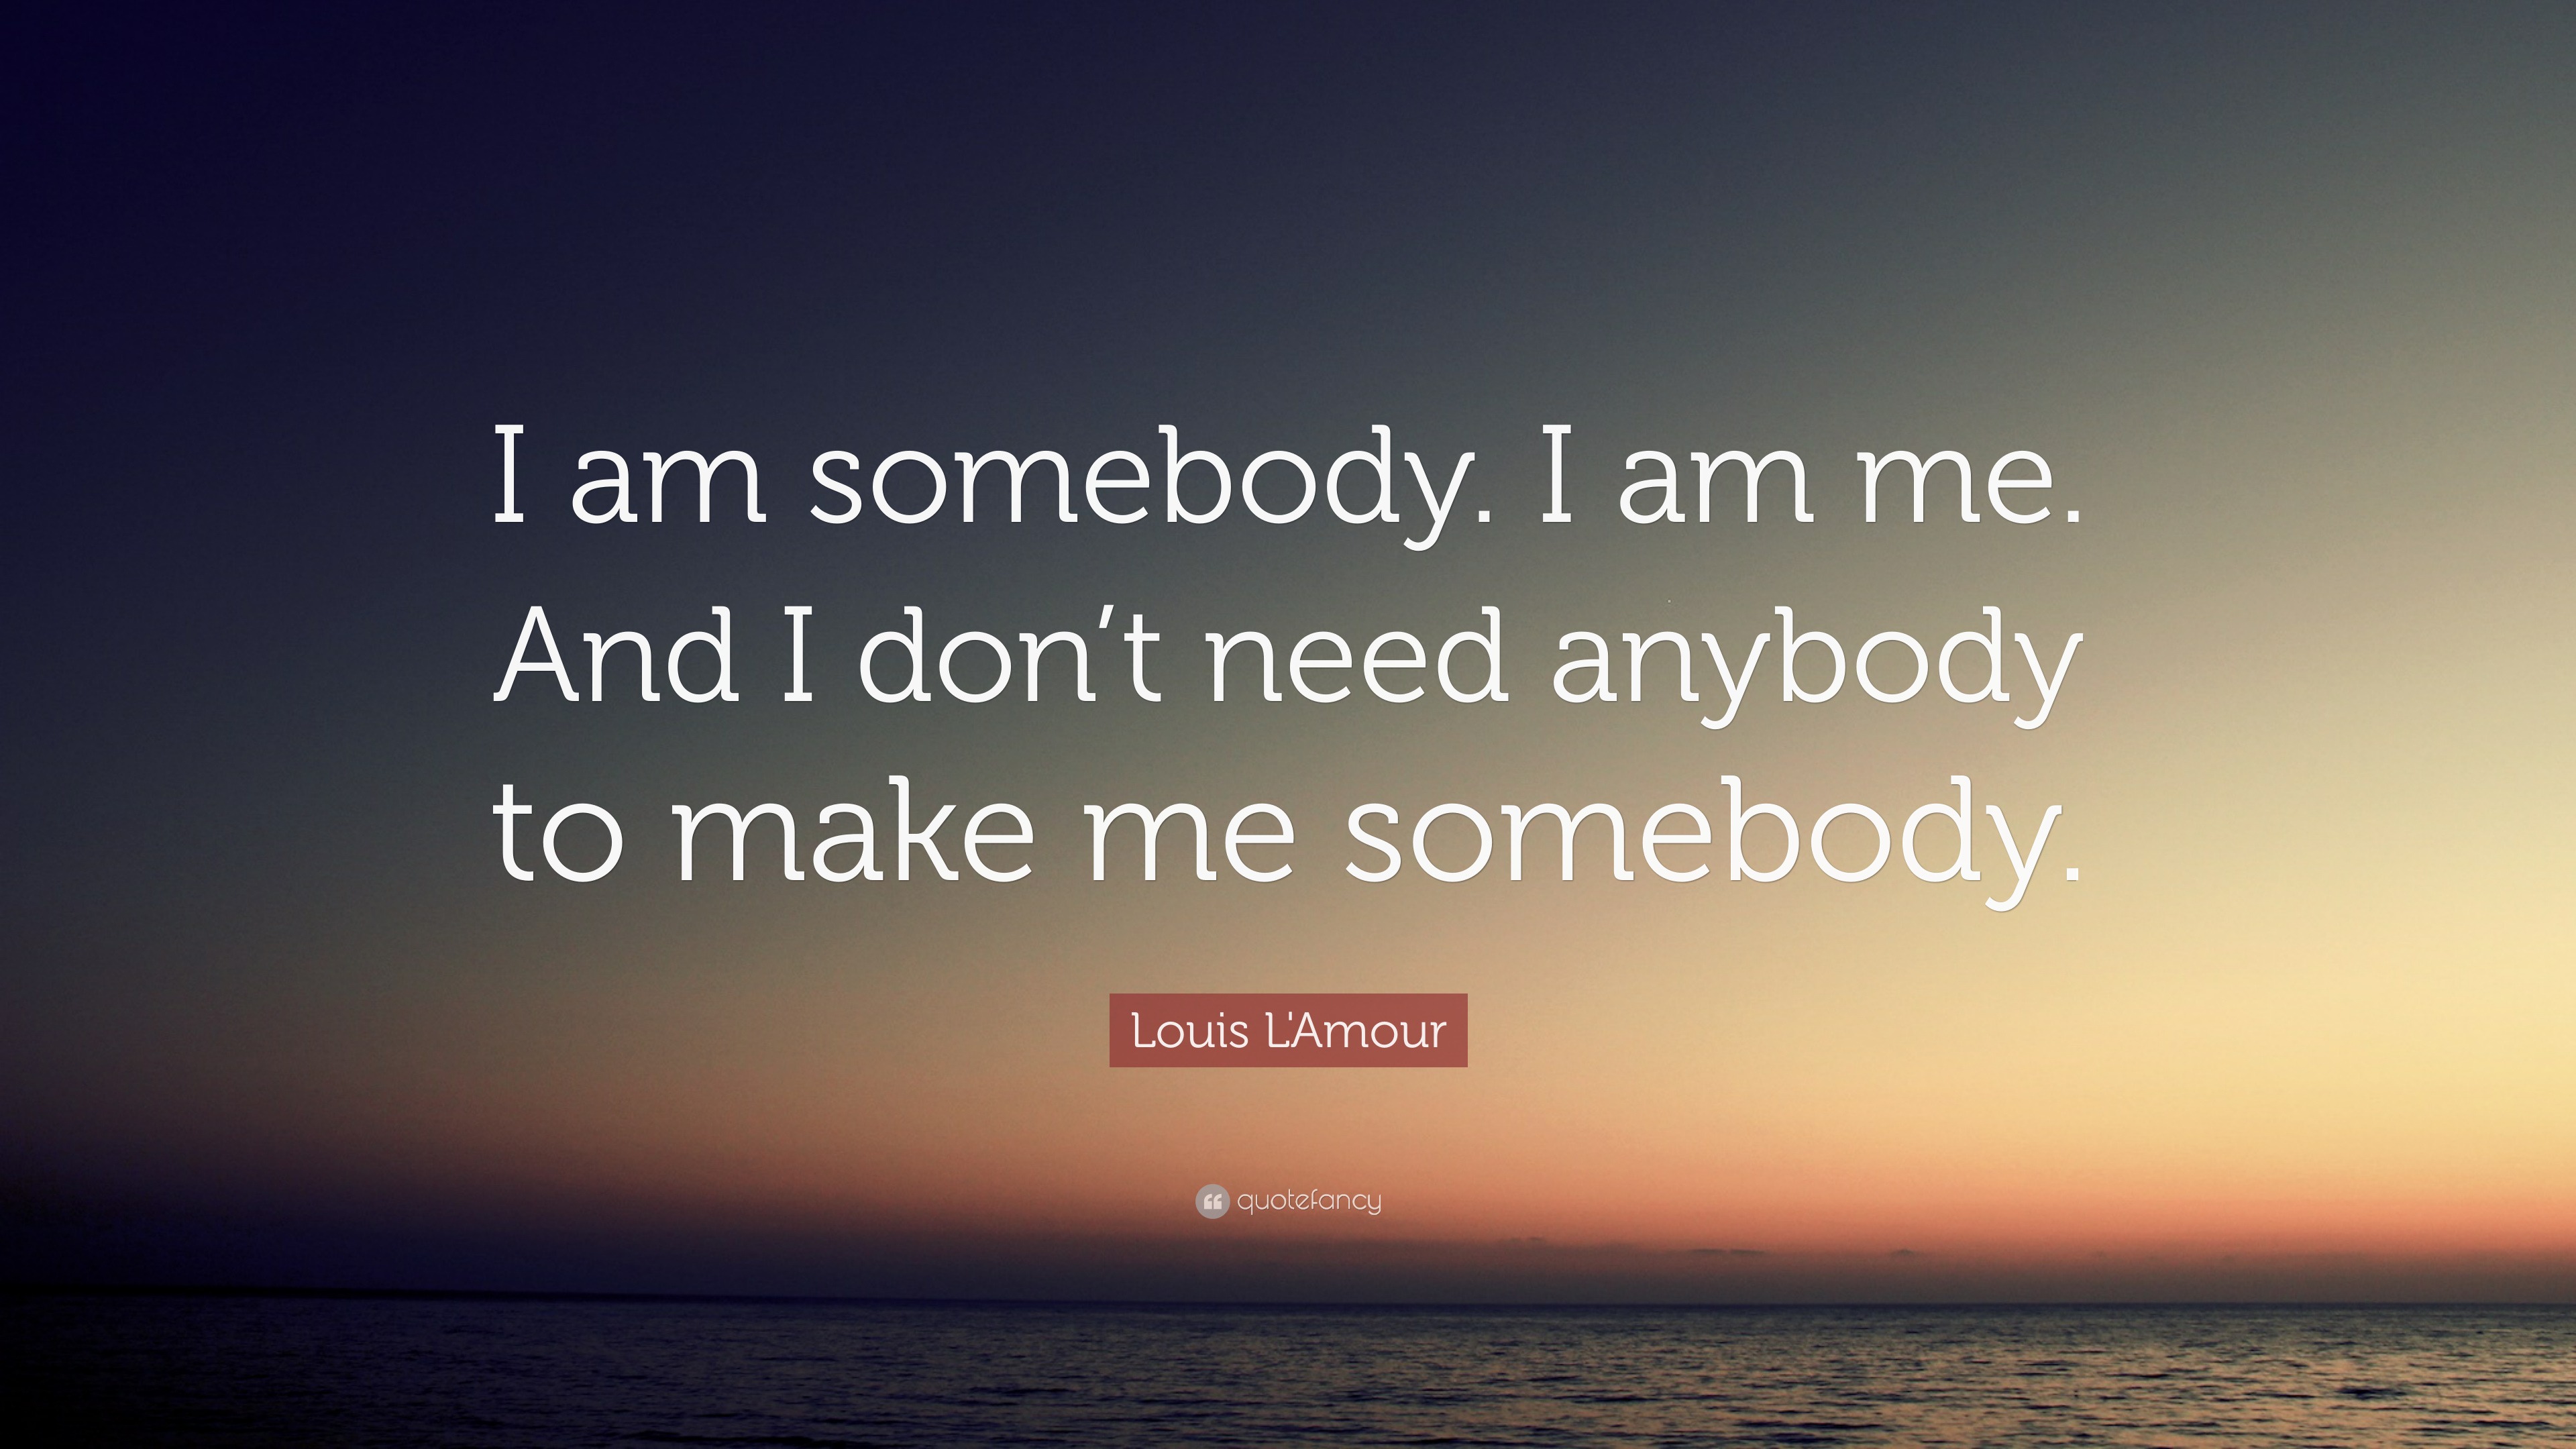 Louis L&#39;Amour Quote: “I am somebody. I am me. And I don’t need anybody to make me somebody.” (7 ...